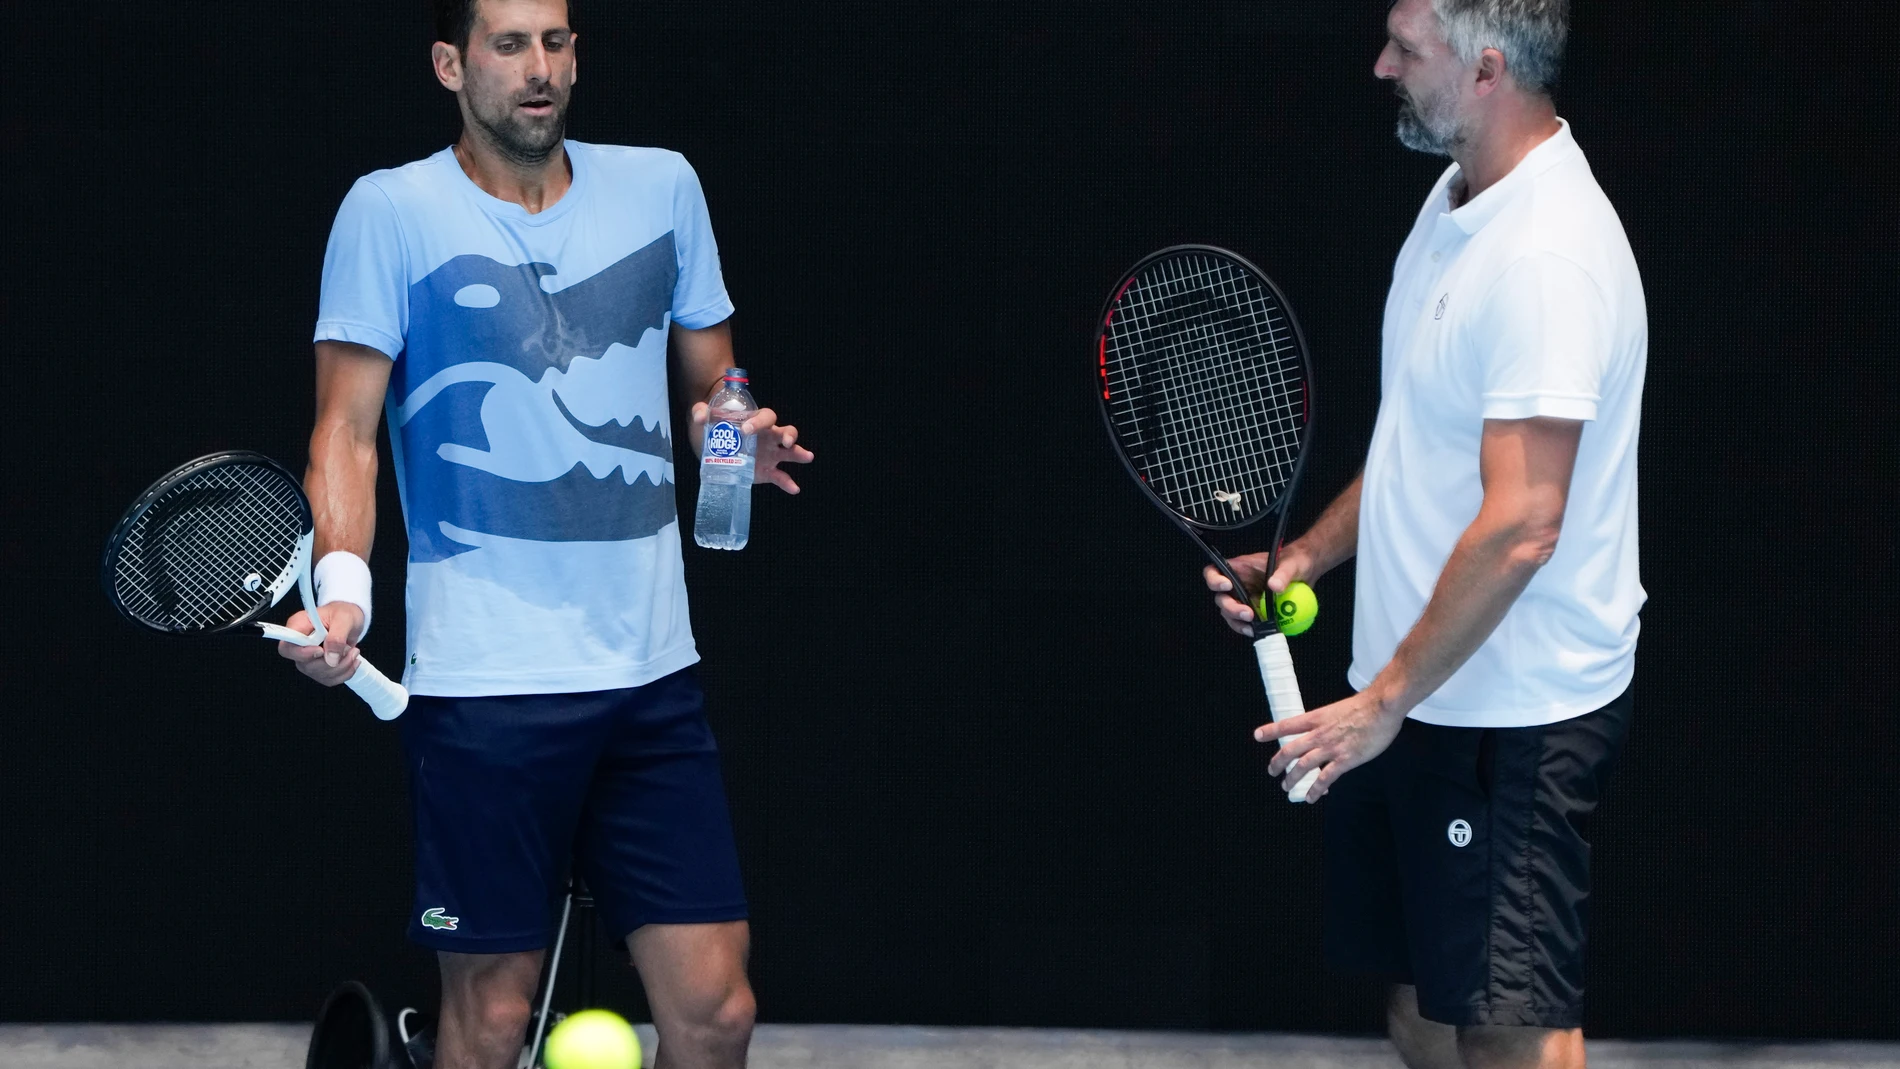 FILE - Serbia's Novak Djokovic, left, gestures as talks with coach Goran Ivanisevic during a practice session ahead of the Australian Open tennis championship in Melbourne, Australia, Friday, Jan. 13, 2023. Djokovic has split with coach Goran Ivanisevic, ending their association that began in 2018 and included 12 Grand Slam titles for the Serbian tennis player, Djokovic wrote in a post on Instagram published Wednesday, March 27, 2024. (AP Photo/Mark Baker, File)